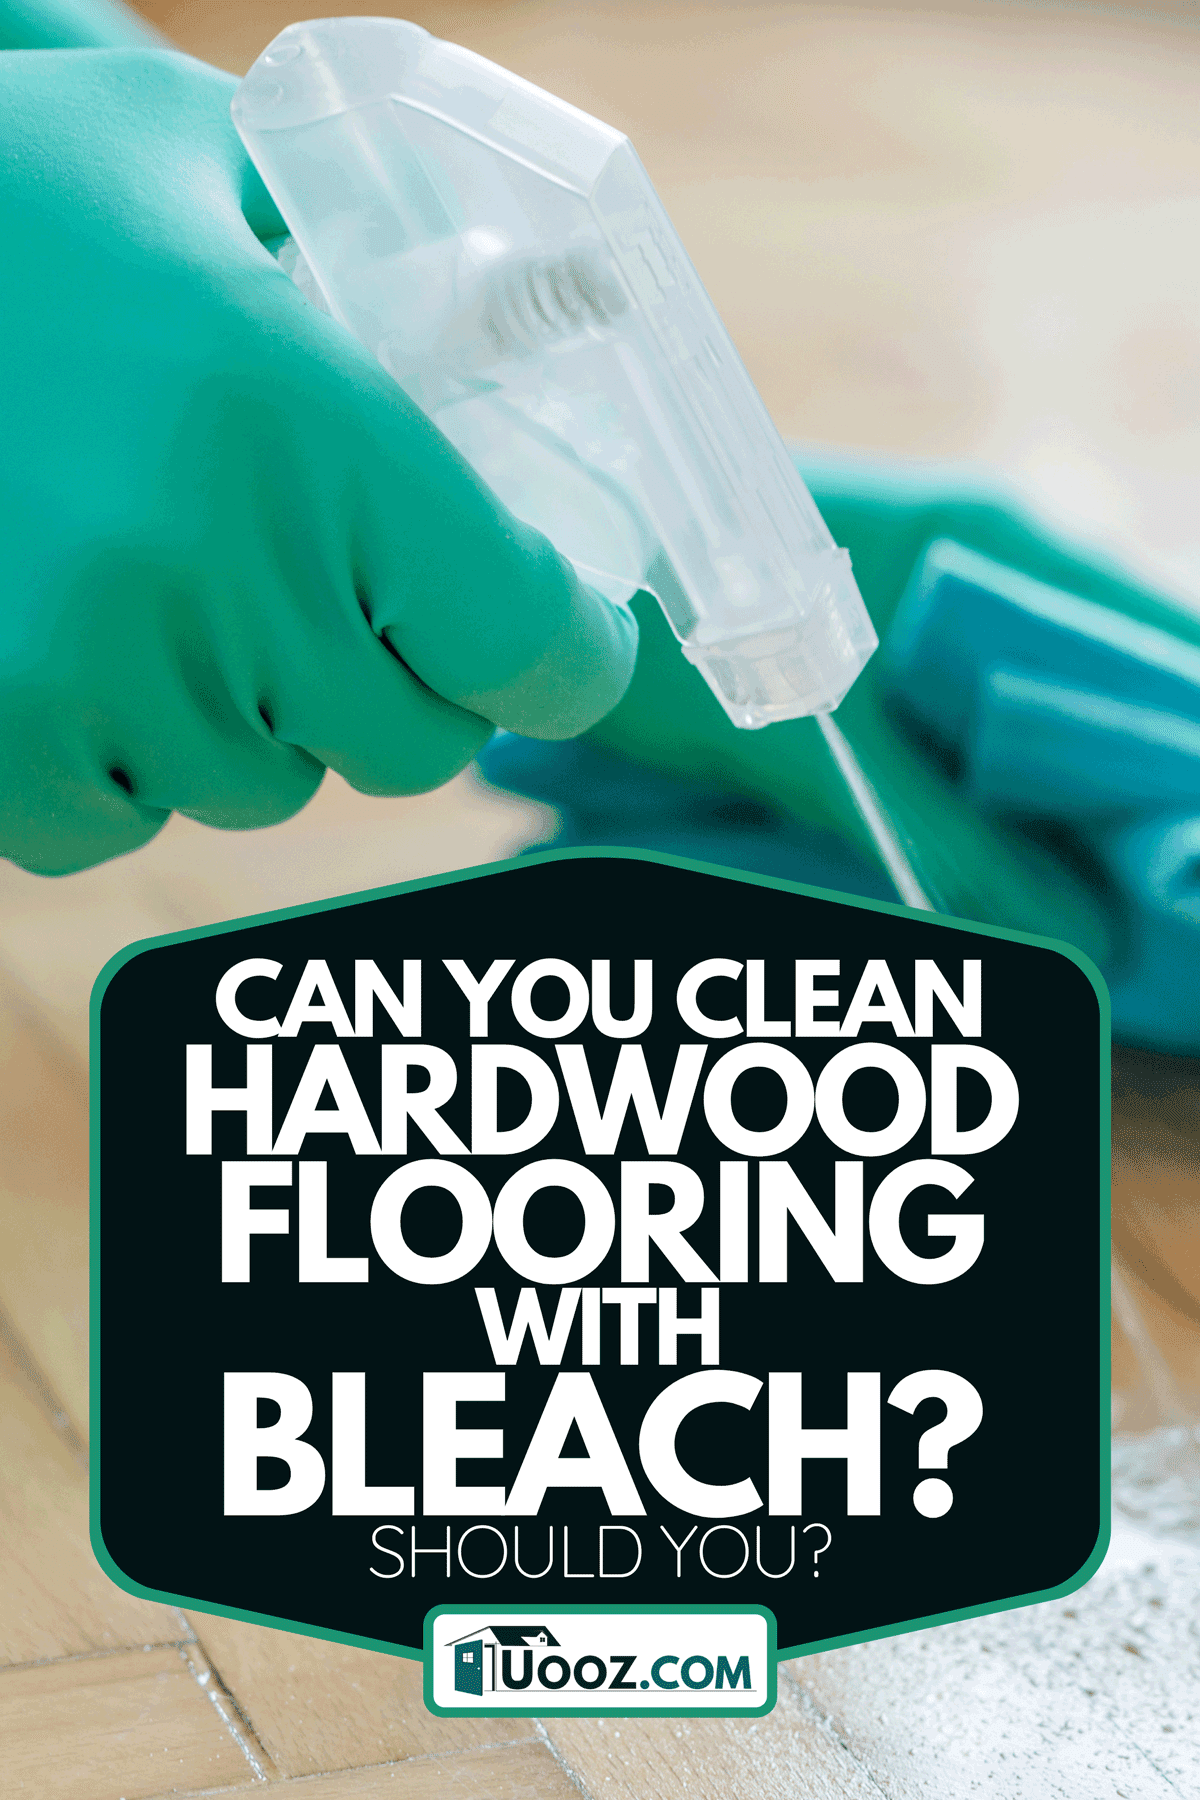 Cleaning floor with a bleach, Can You Clean Hardwood Flooring With Bleach? Should You?